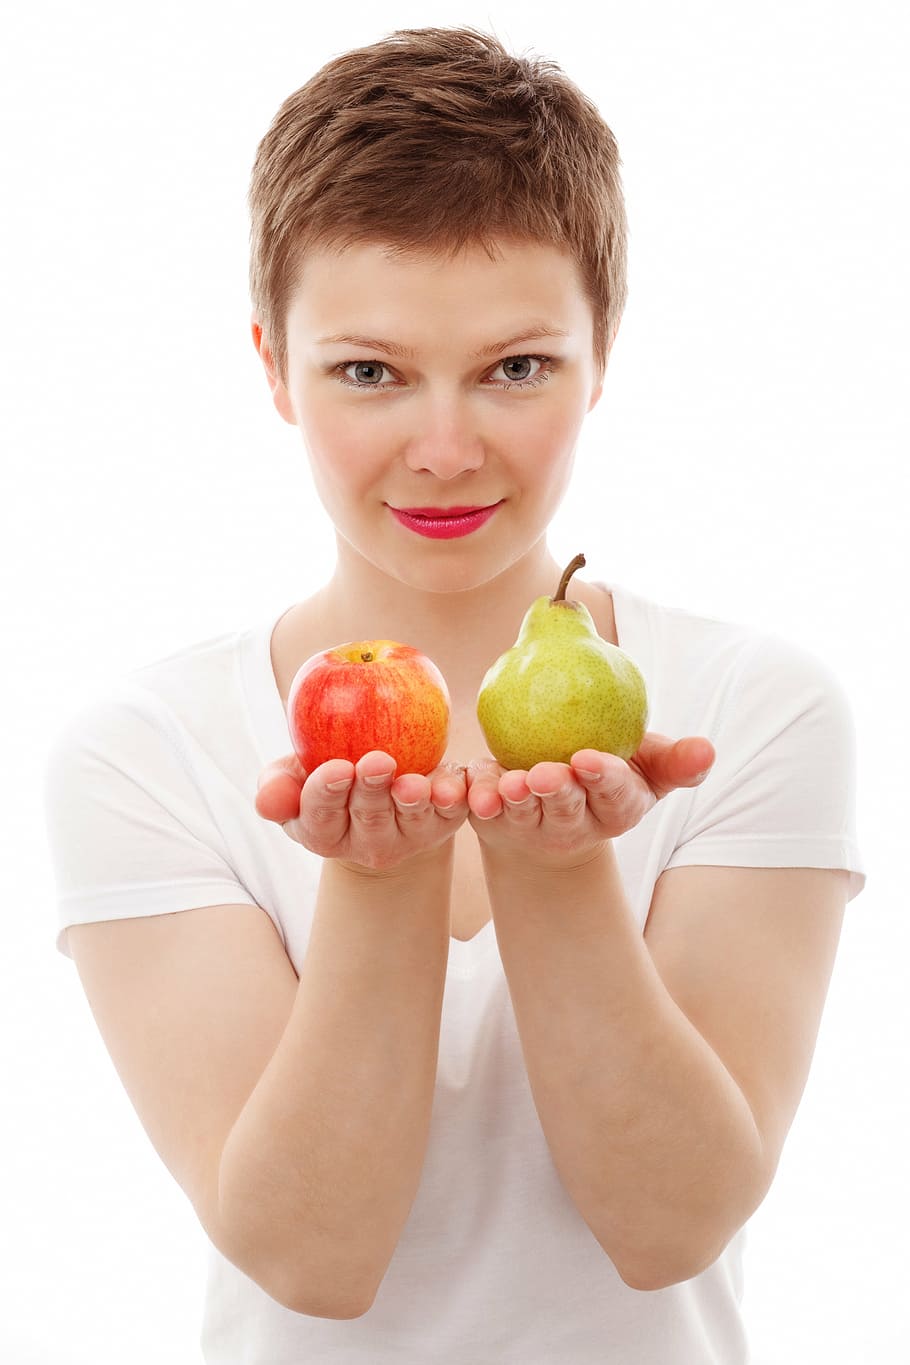 woman, holding, apple, pear fuits, diet, face, food, fresh, fruit, girl